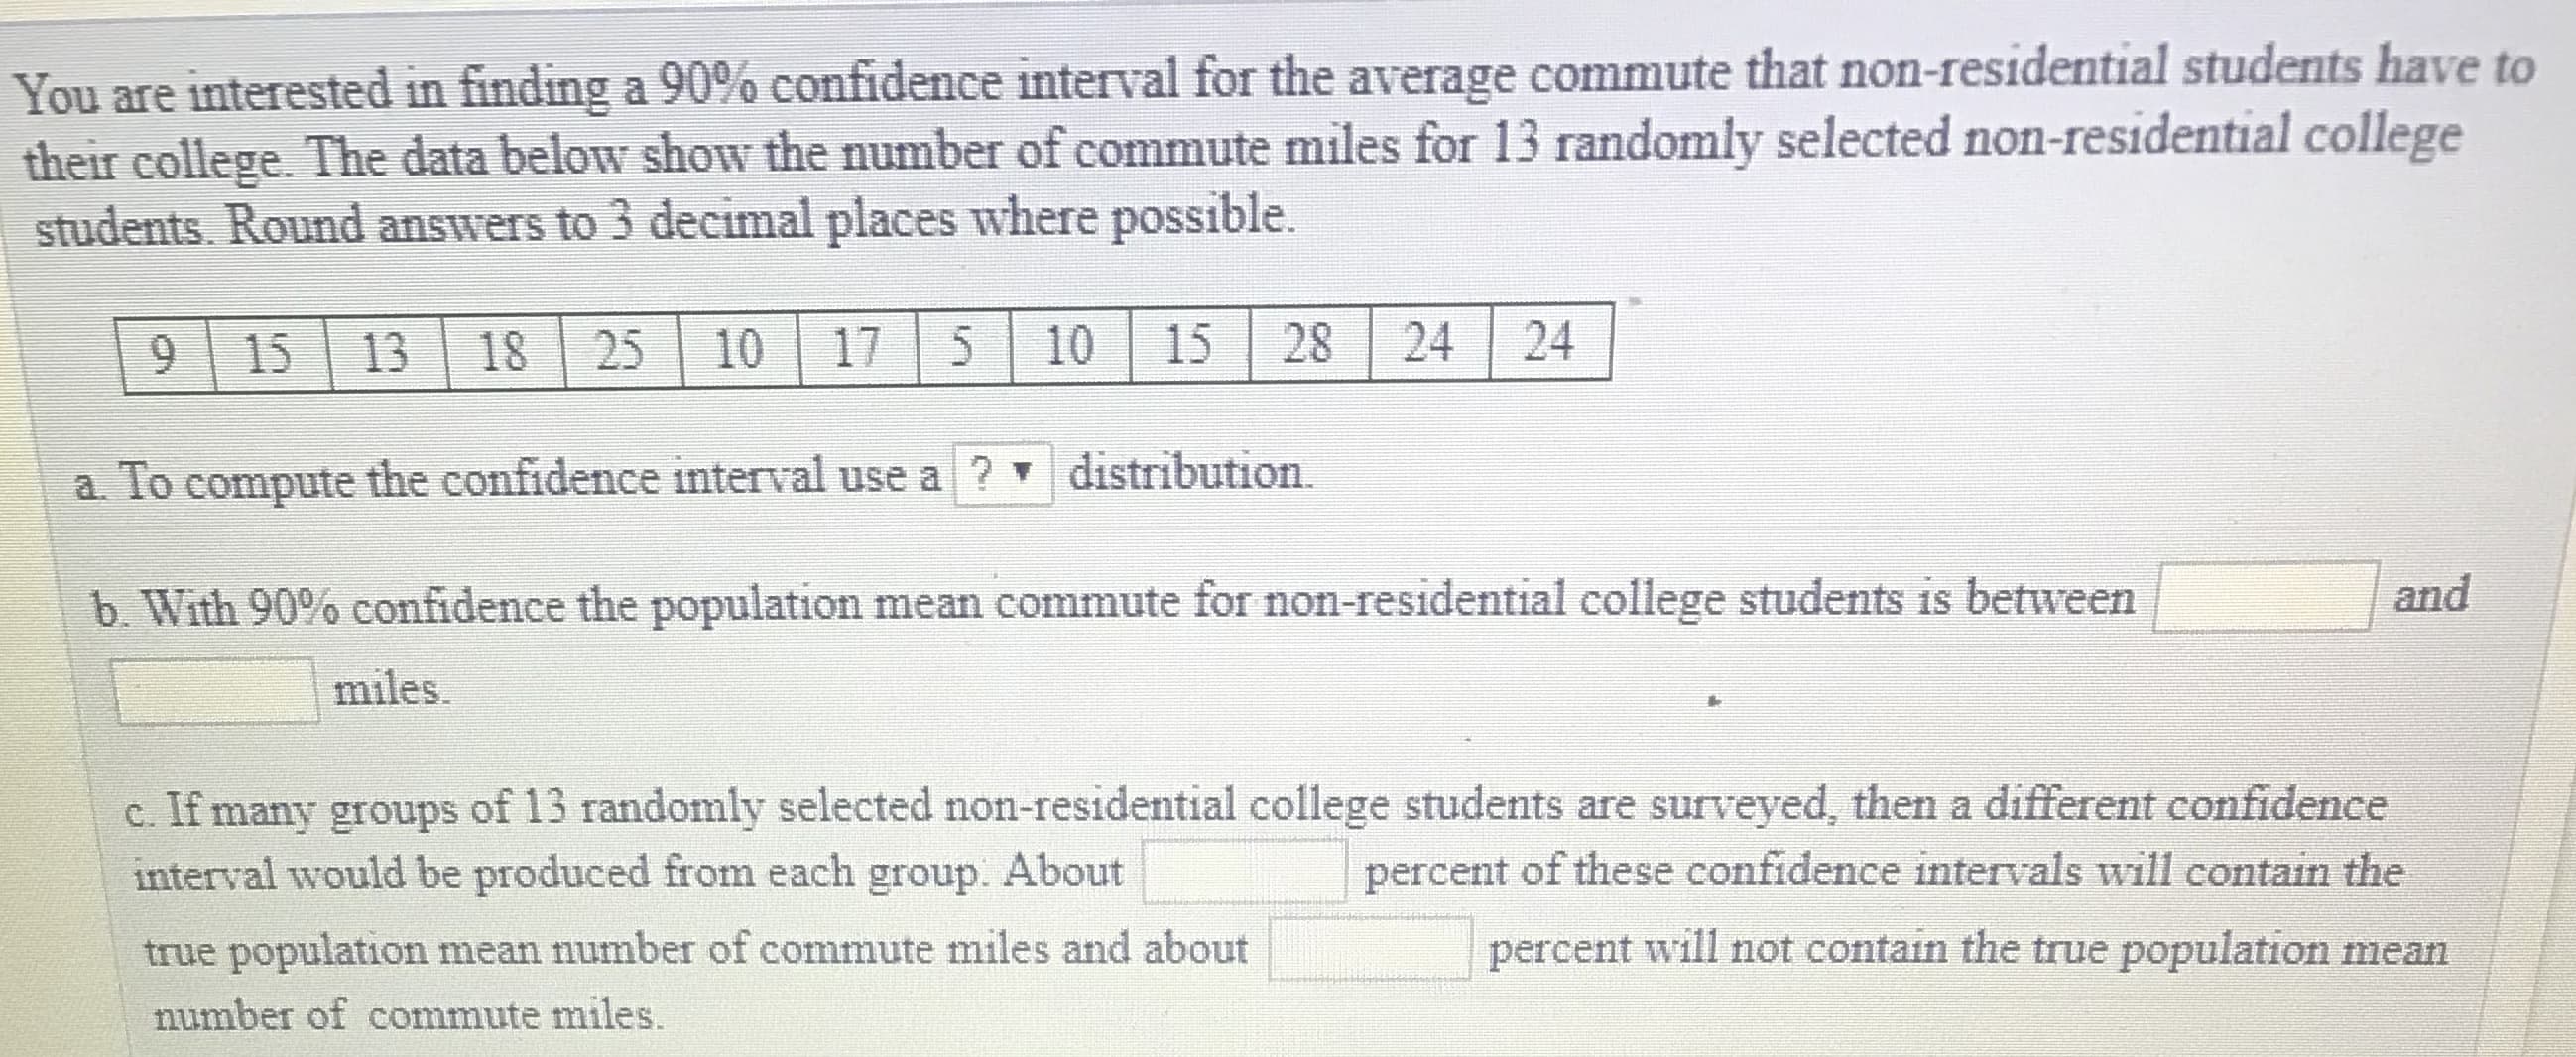 You are interested in finding a 90% confidence interval for the average commute that non-residential students have to
their college. The data below show the number of commute miles for 13 randomly selected non-residential college
students. Round answers to 3 decimal places where possible.
9 15 13 18 25 10 17 5 10 15 28 24 24
a. To compute the confidence interval use a? distribution
b, With 90% confidence the population mean commute for non-residential college students is between
and
miles
c. If many groups of 13 randomly selected non-residential college students are surveyed, then a different confidence
interval would be produced from each group. About
true population mean number of commute miles and about
number of commute miles.
percent of these confidence intervals will contain the
percent will not contain the true population mean
